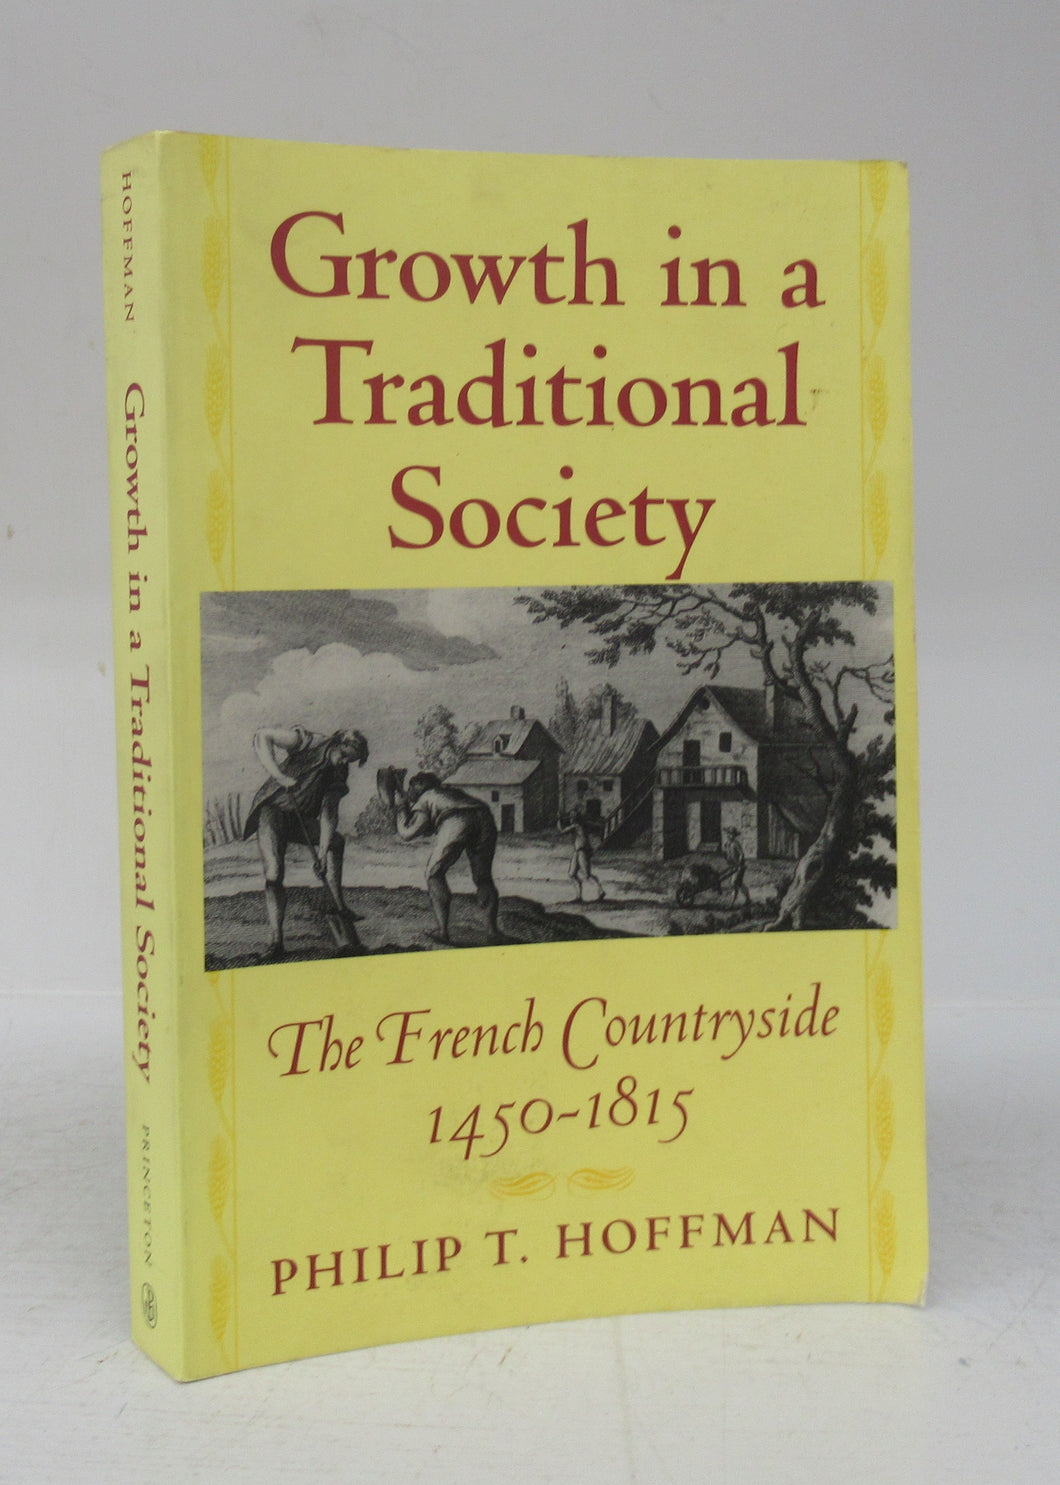 Growth in a Traditional Society: The French Countryside 1450-1815